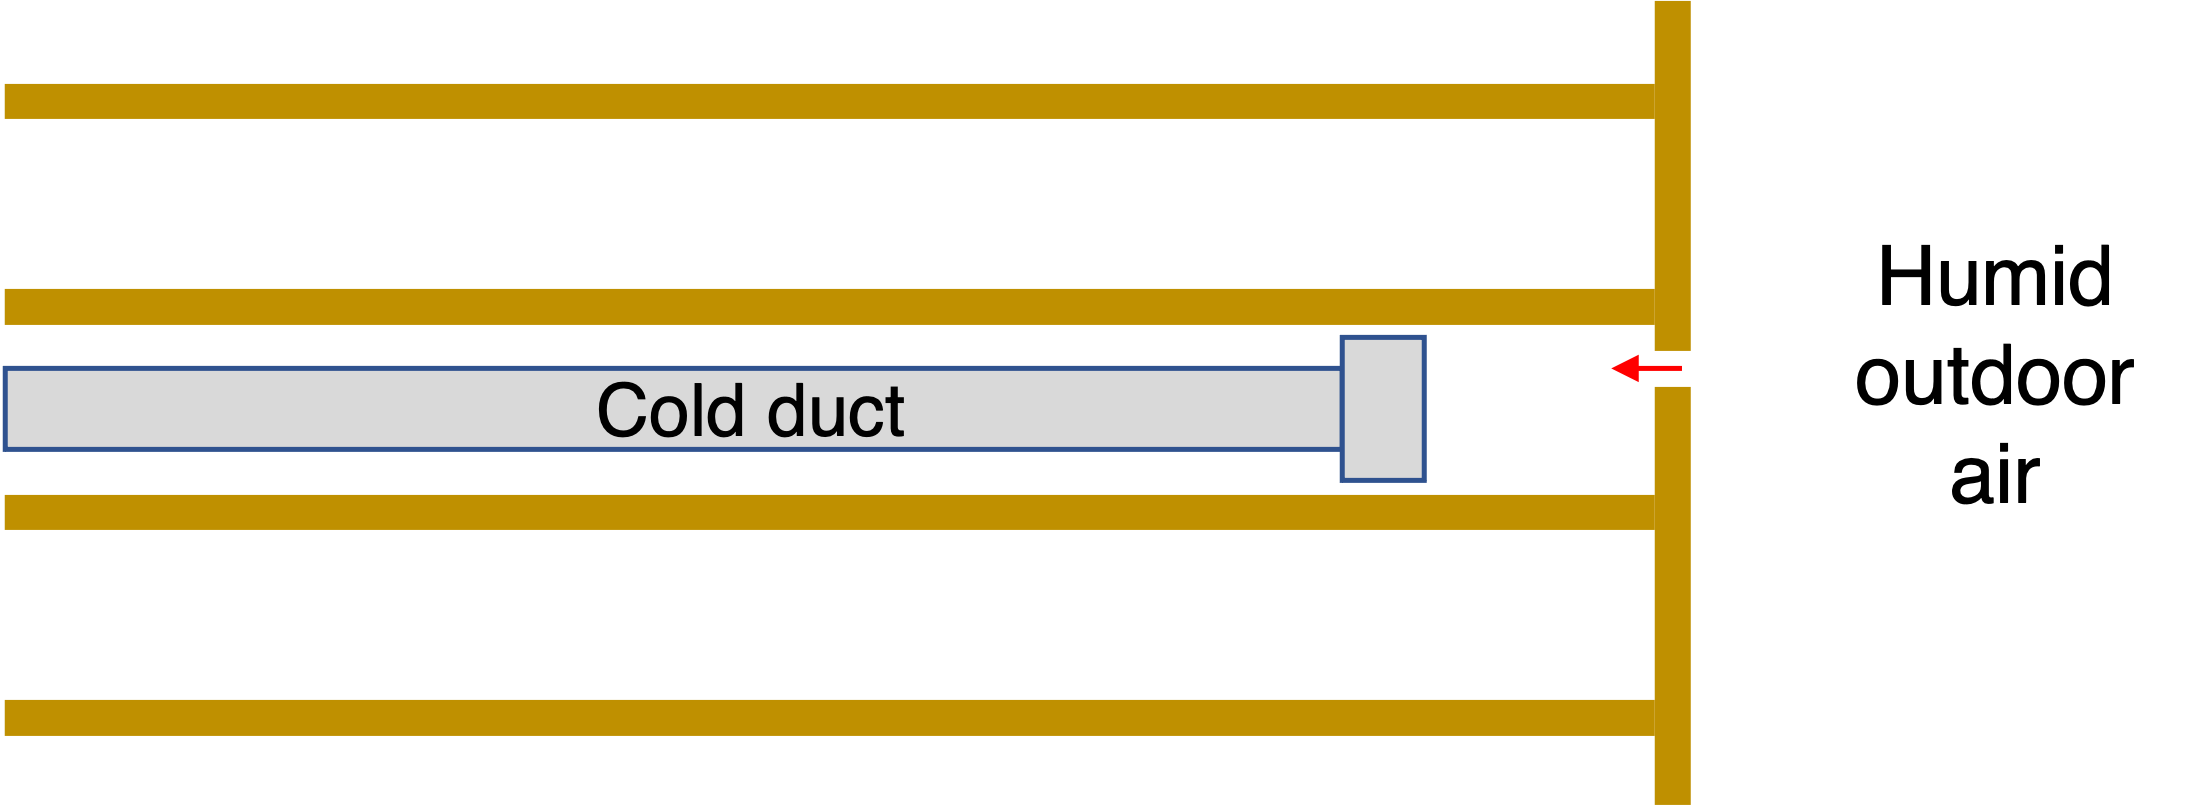 Sealed duct in an interstitial space with the potential for condensation